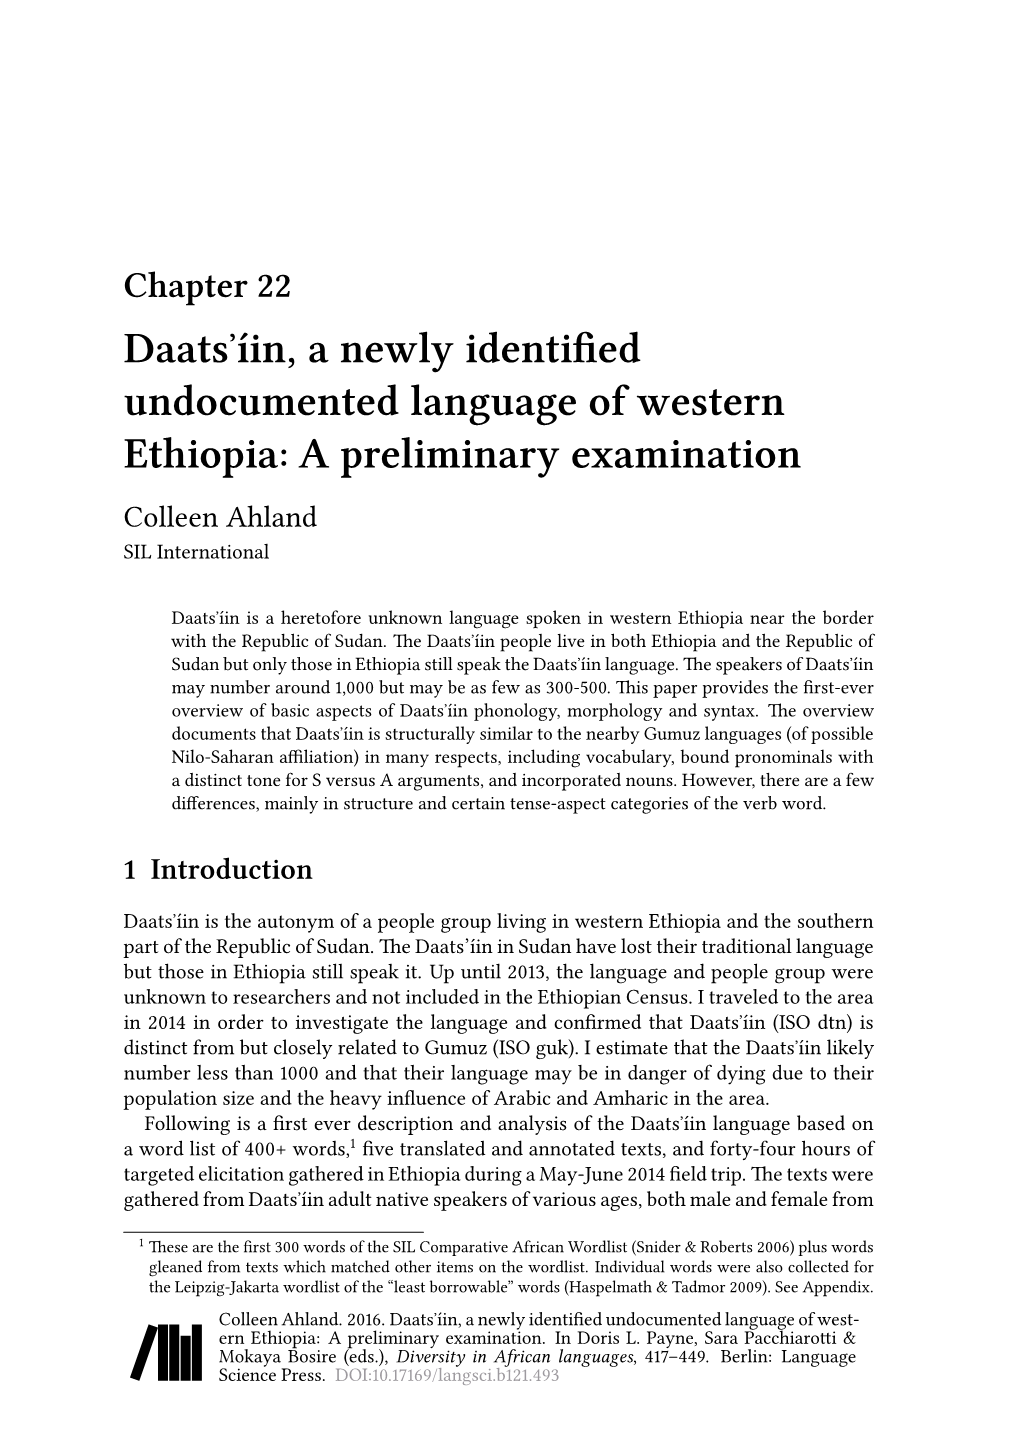 Chapter 22 Daatsʼíin, a Newly Identified Undocumented Language of Western Ethiopia: a Preliminary Examination Colleen Ahland SIL International